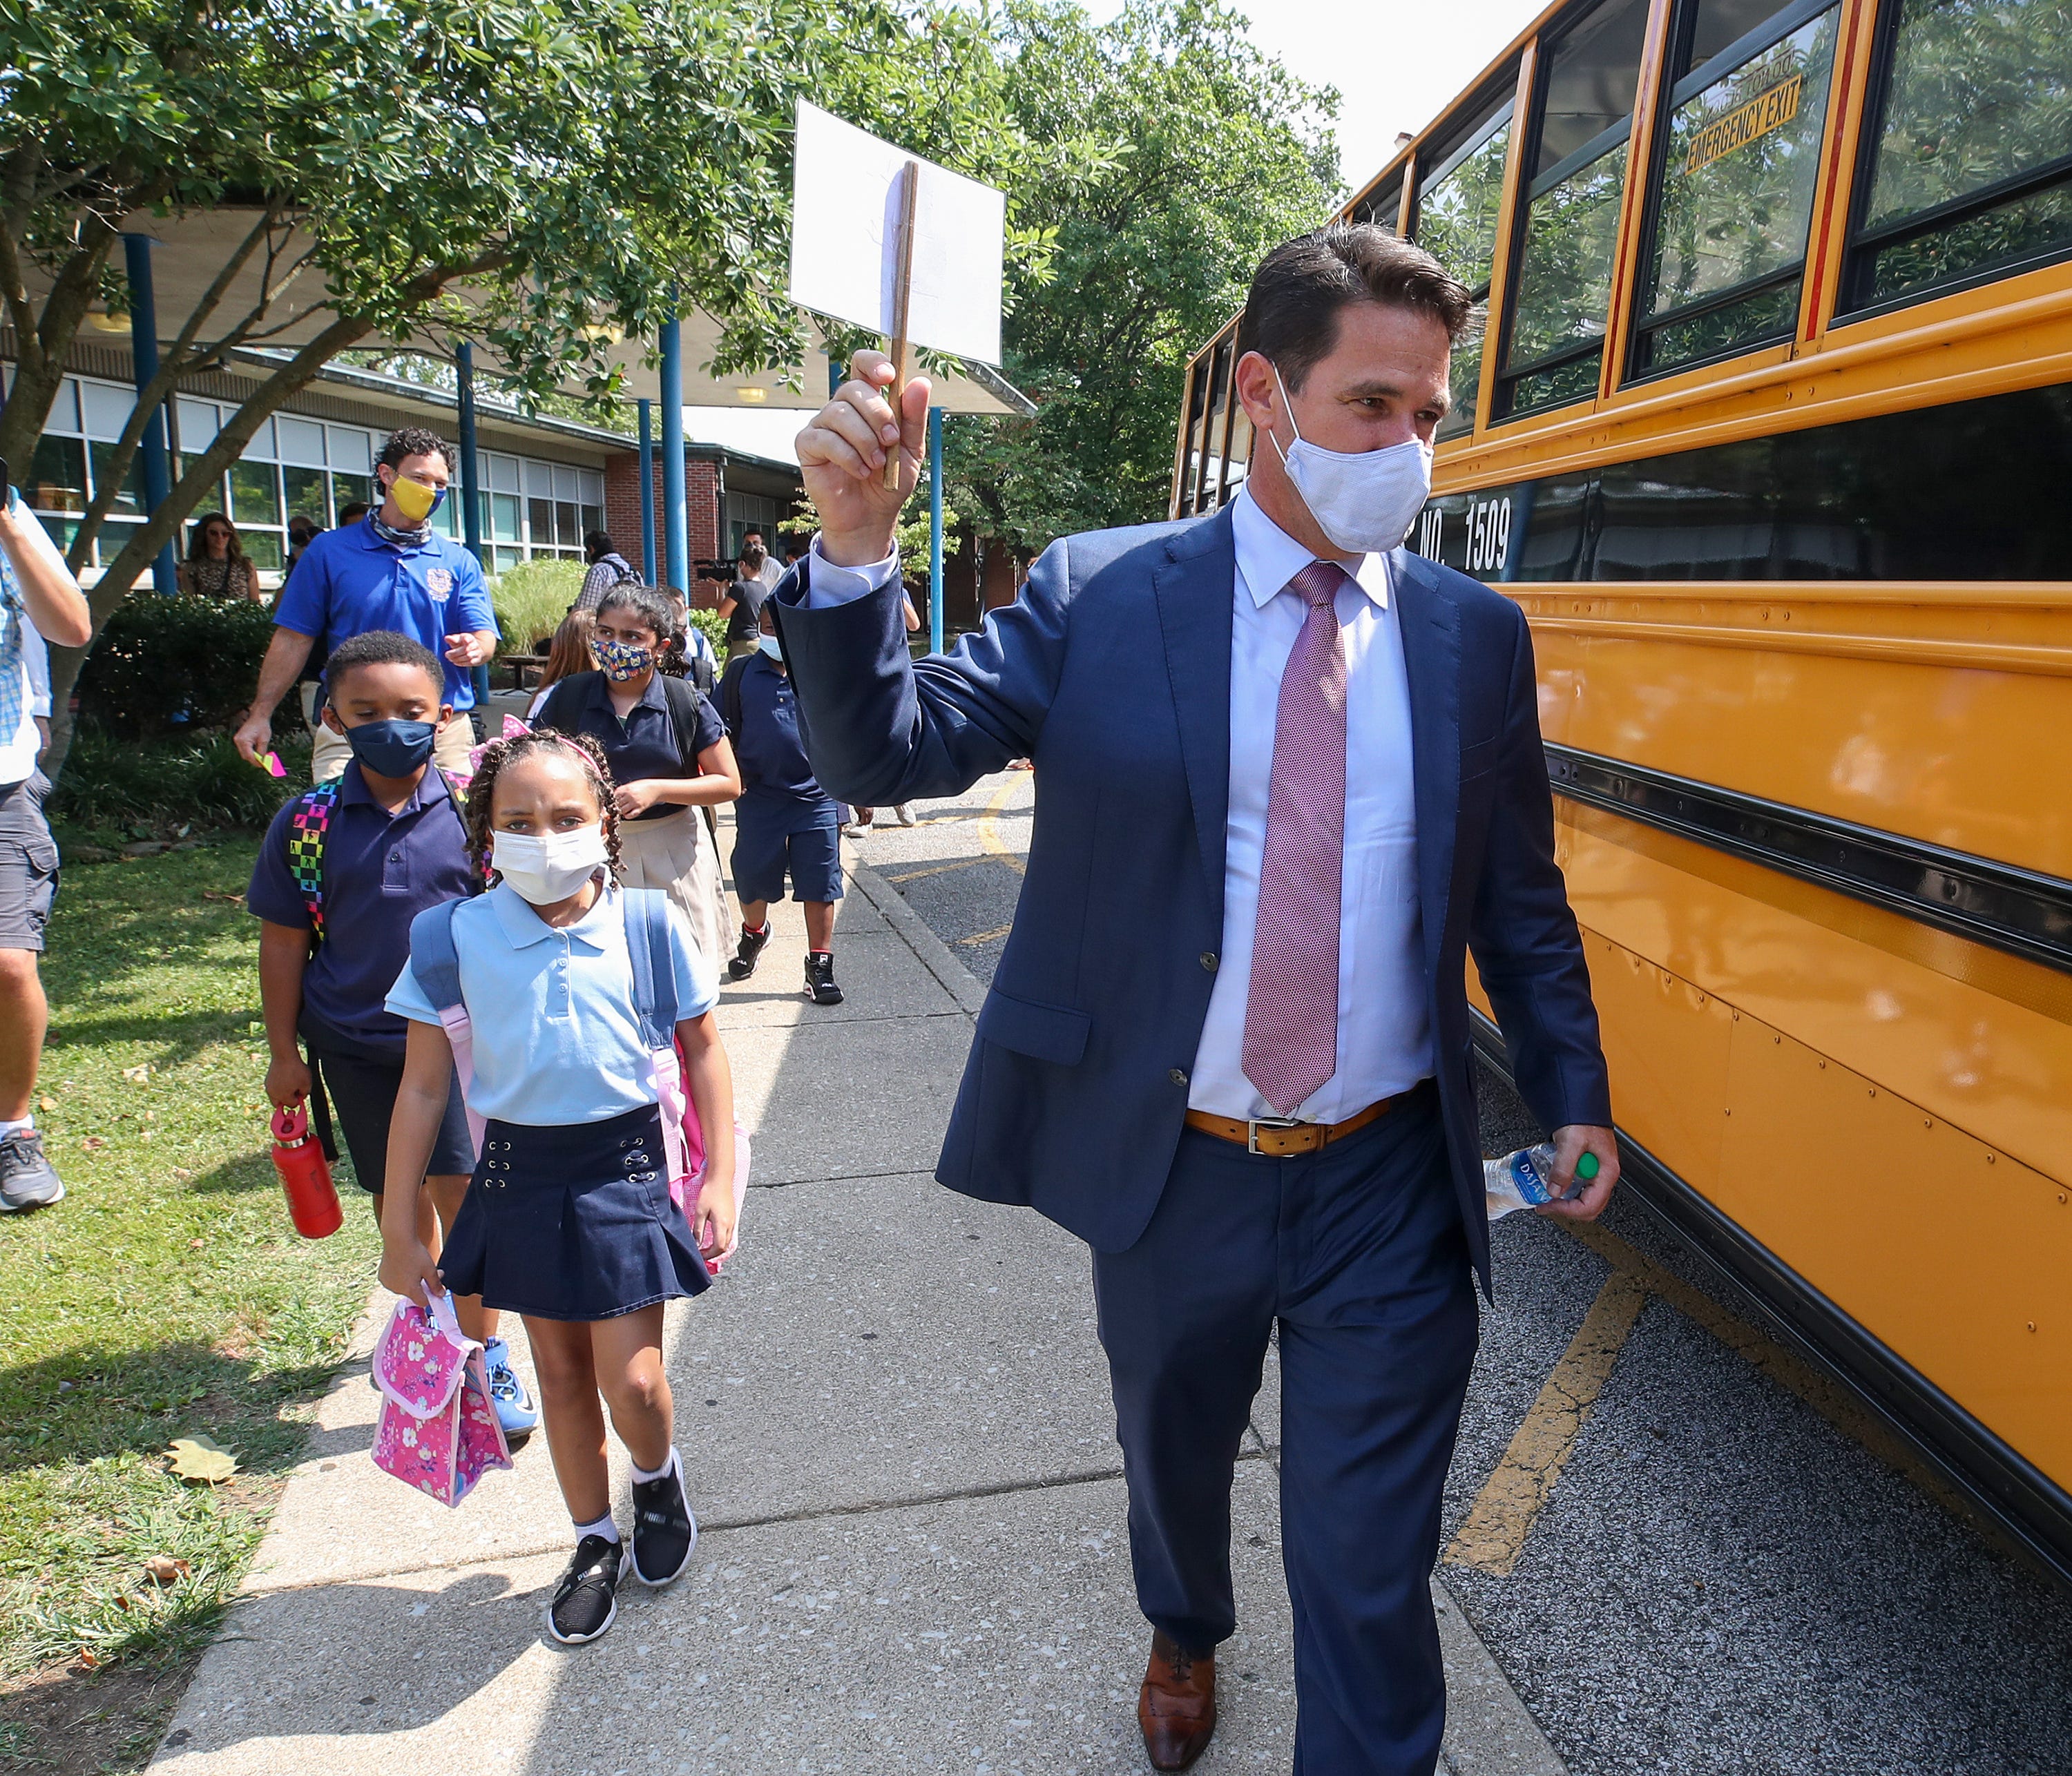 JCPS may stop Louisville's traditional schools from kicking out kids